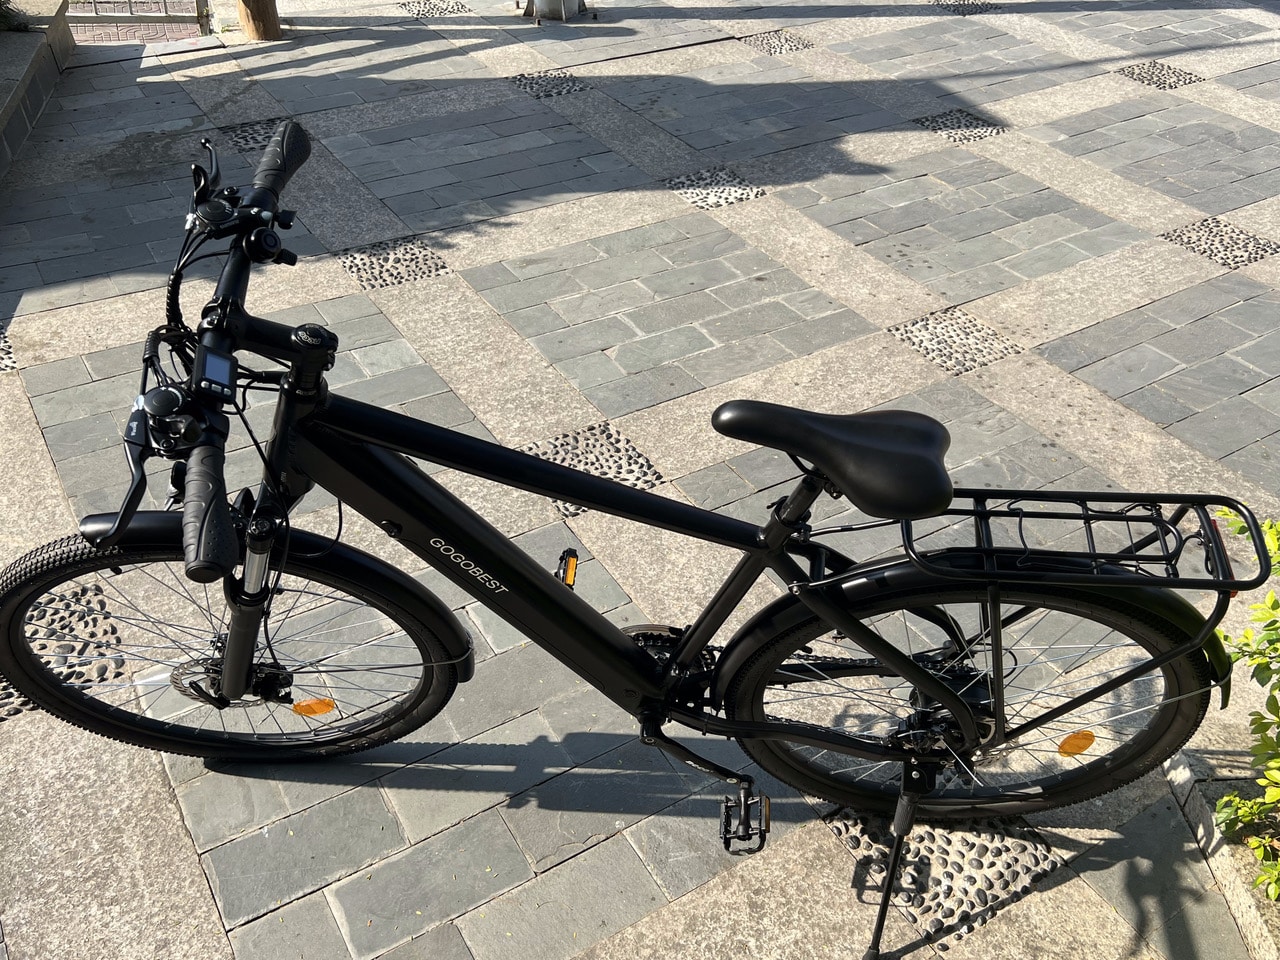 GOGOBEST GM29 Electric City Bicycle